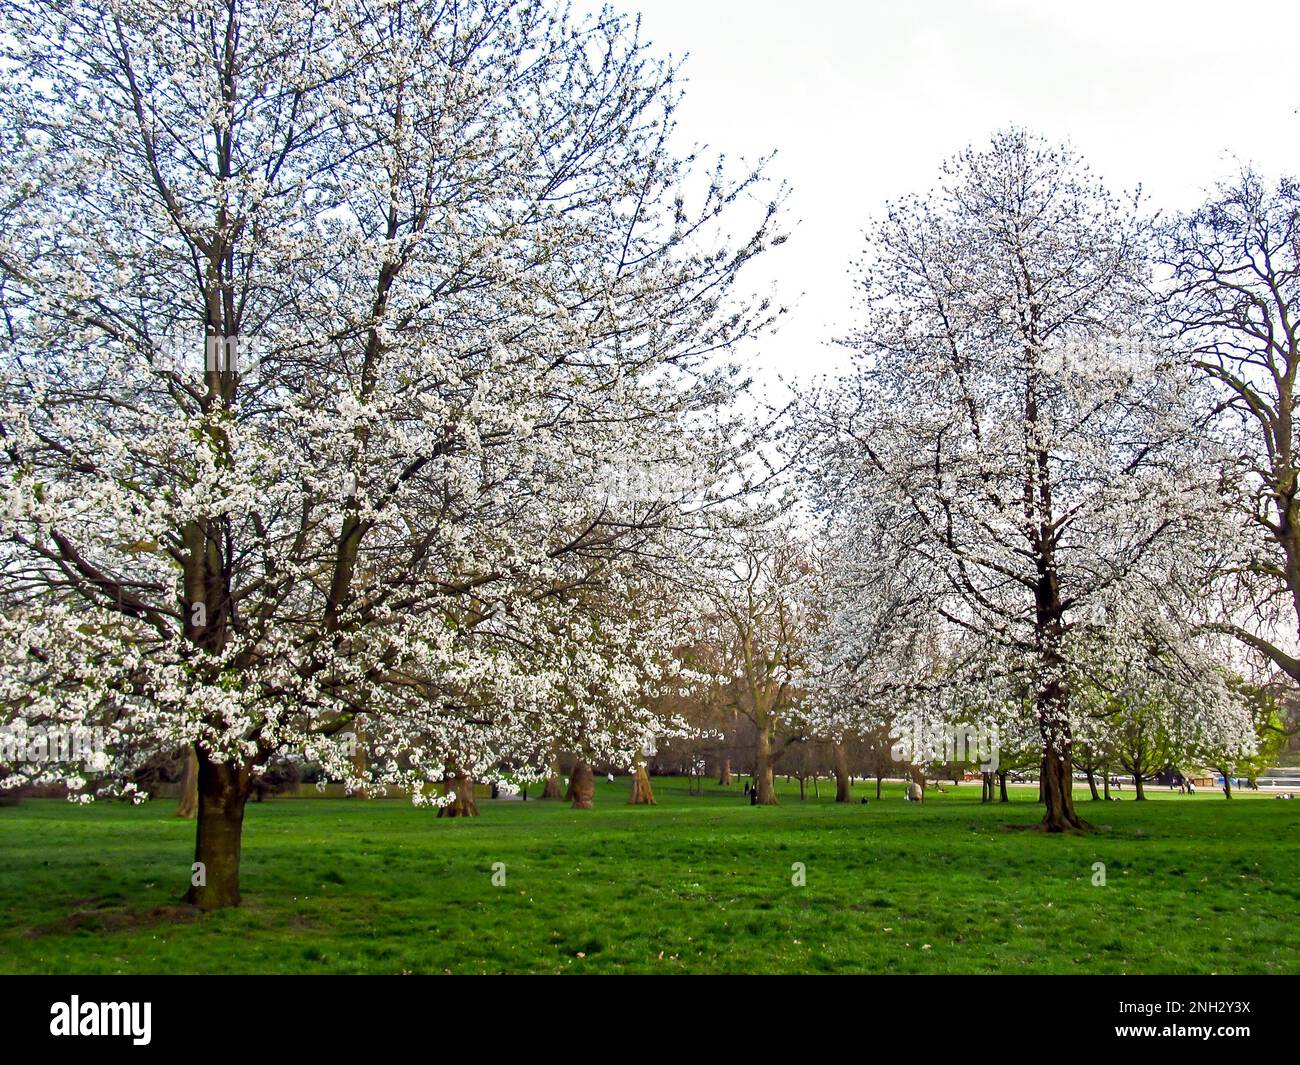 Sweet cherry trees, Prunus Avium, covered in delicate white blossoms in early spring in the United Kingdom. Stock Photo